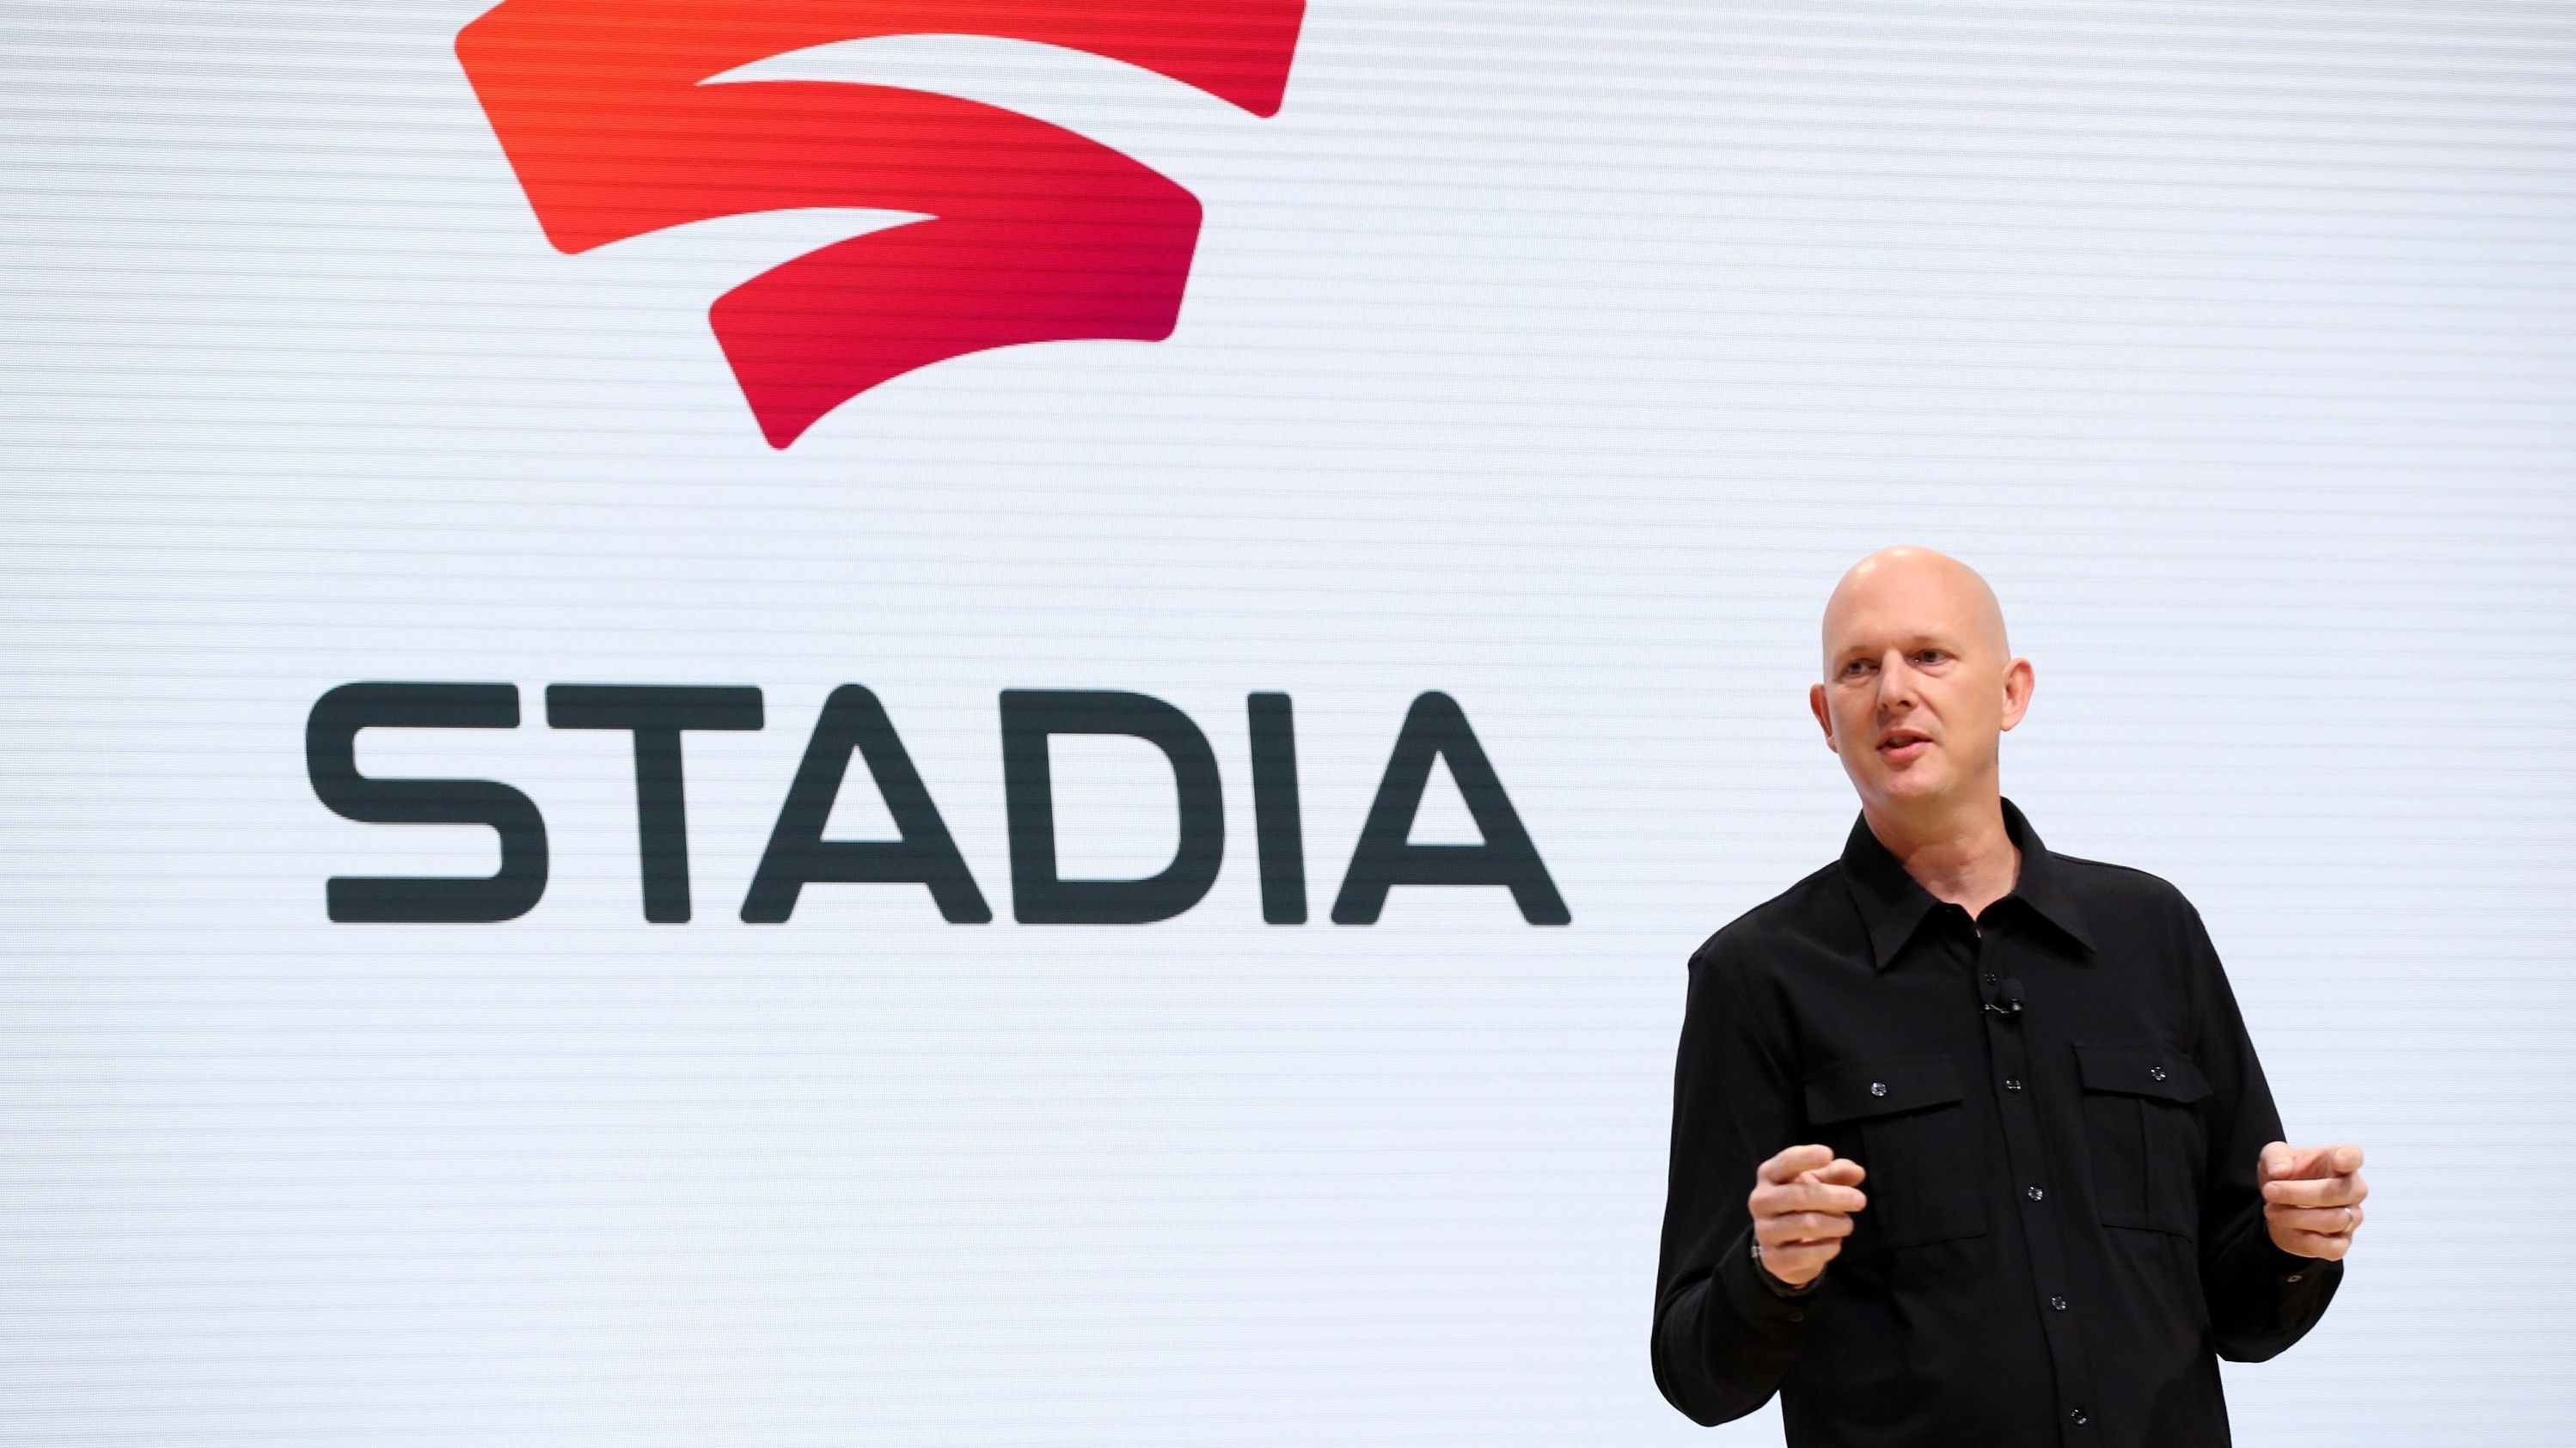 Google Stadia Employees Praised For “Great Progress” Right Before Layoffs